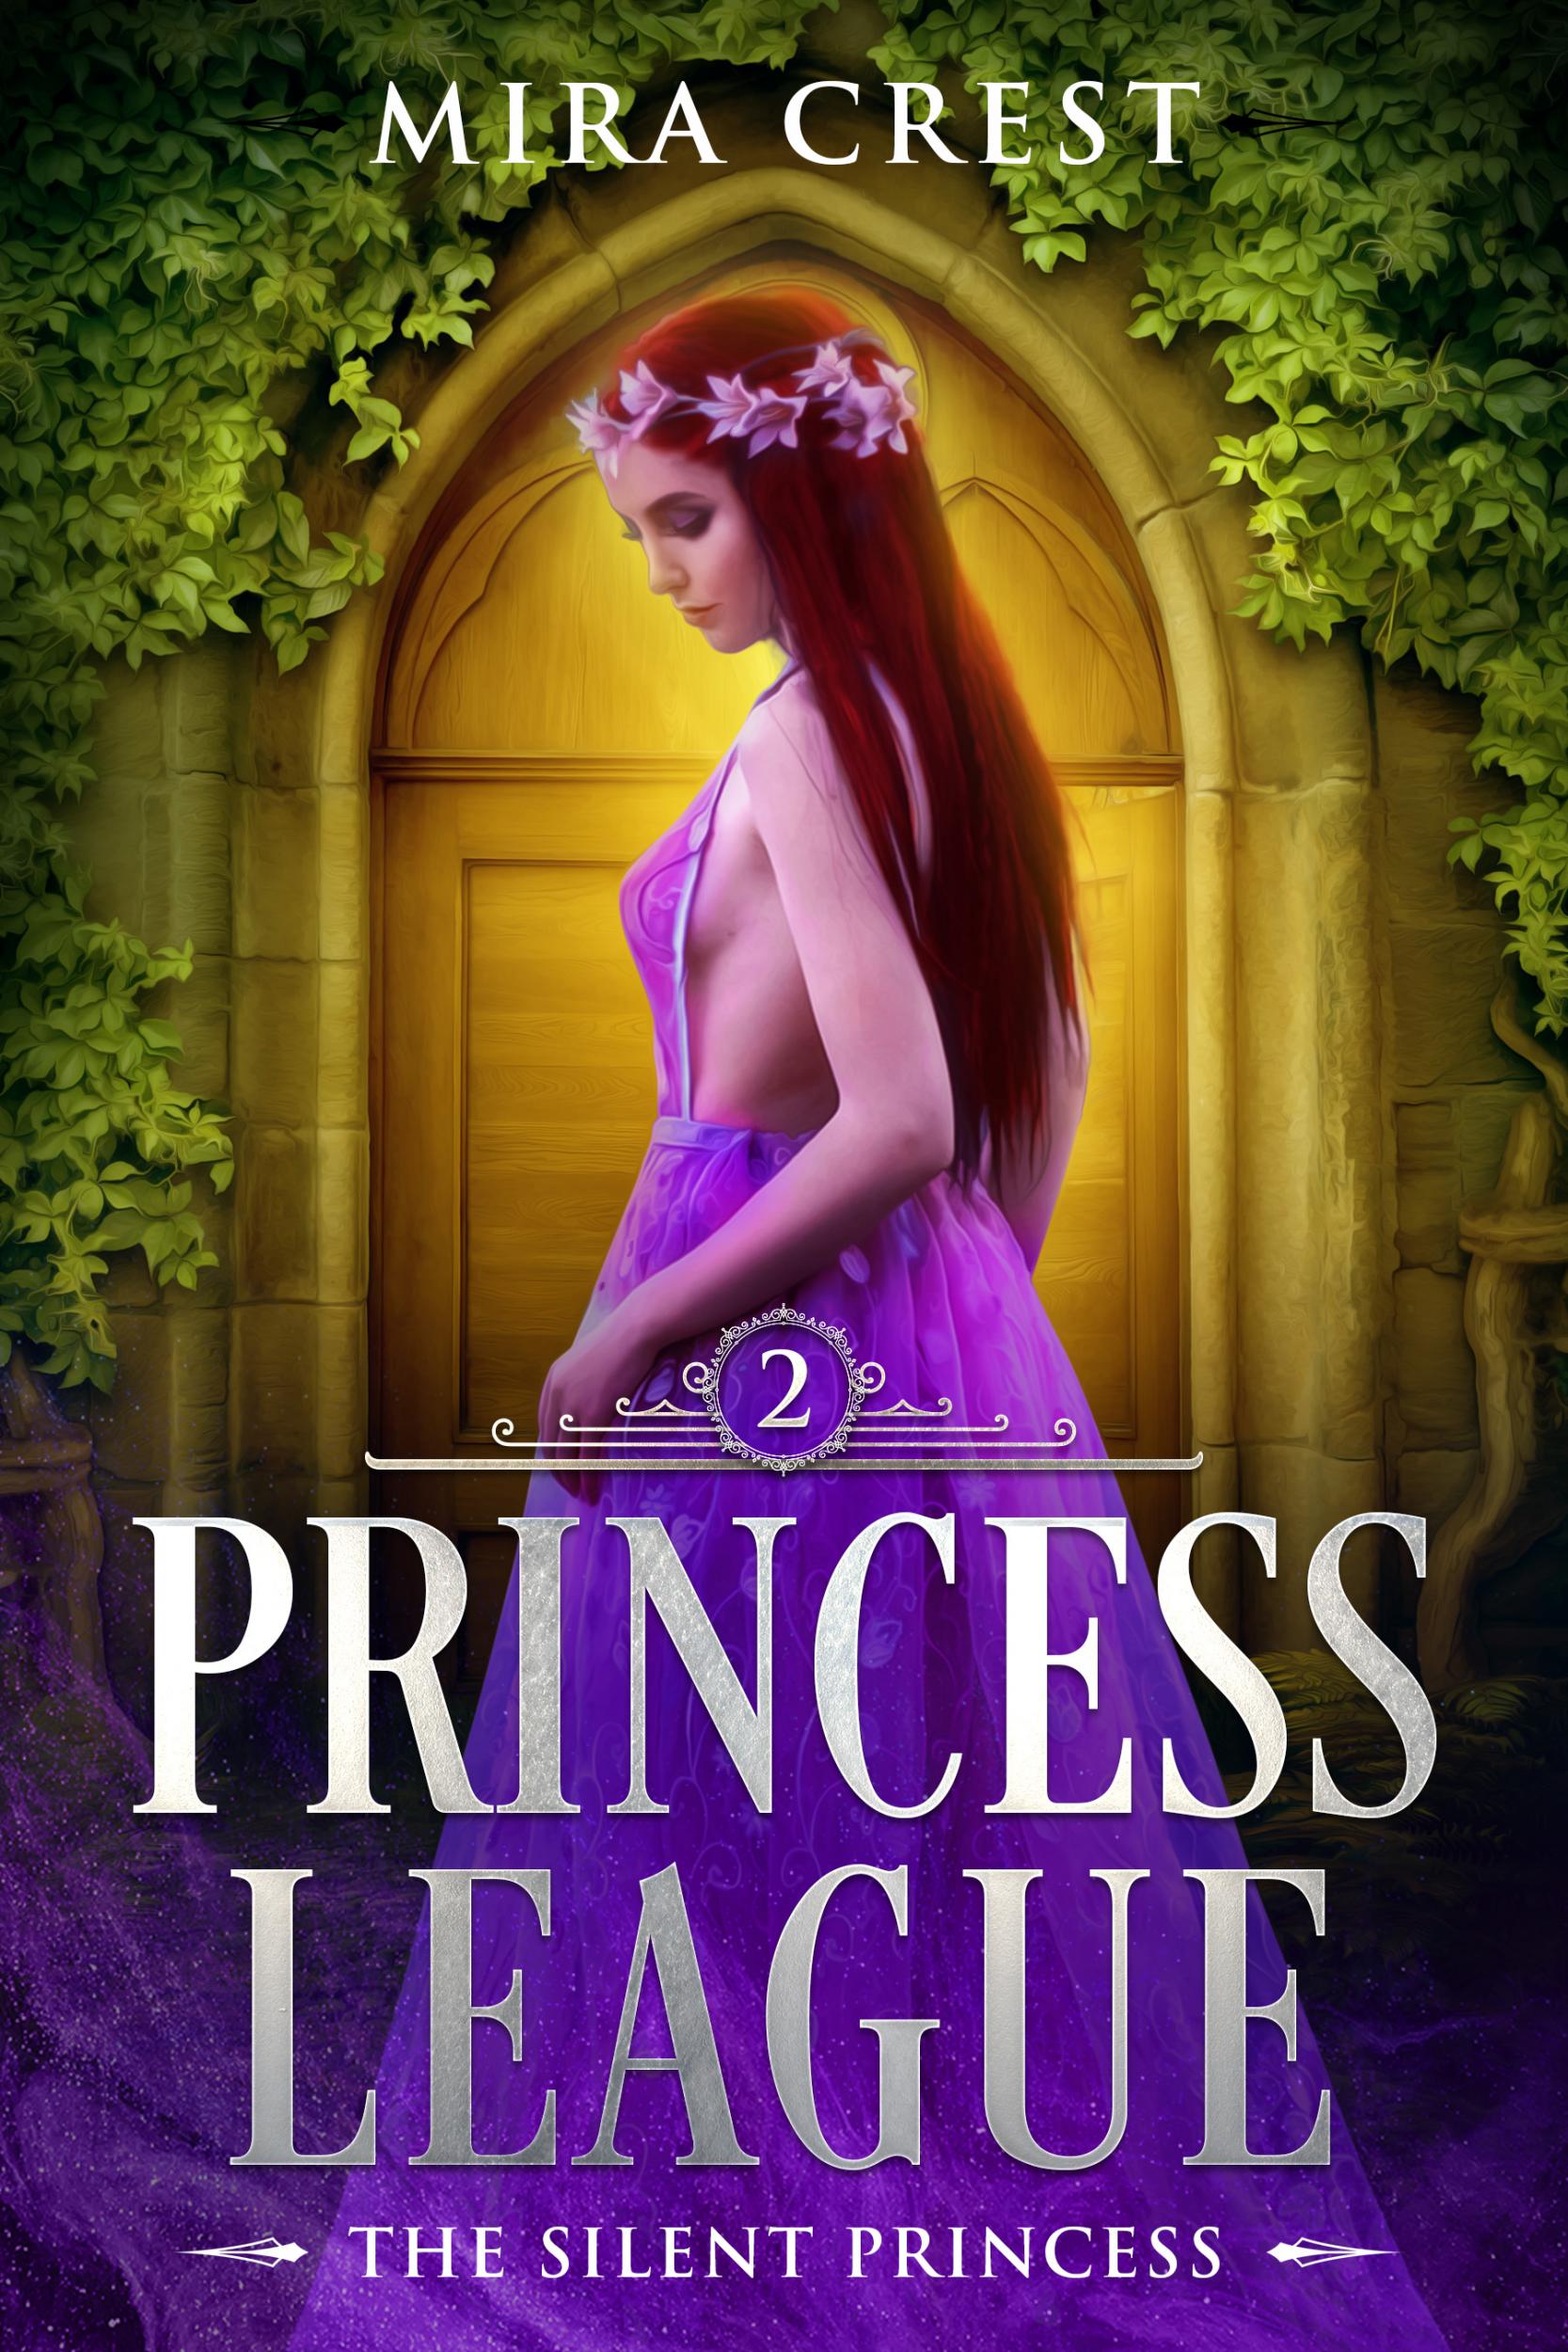 Get Your Free Copy Of The Silent Princess Princess League Series By